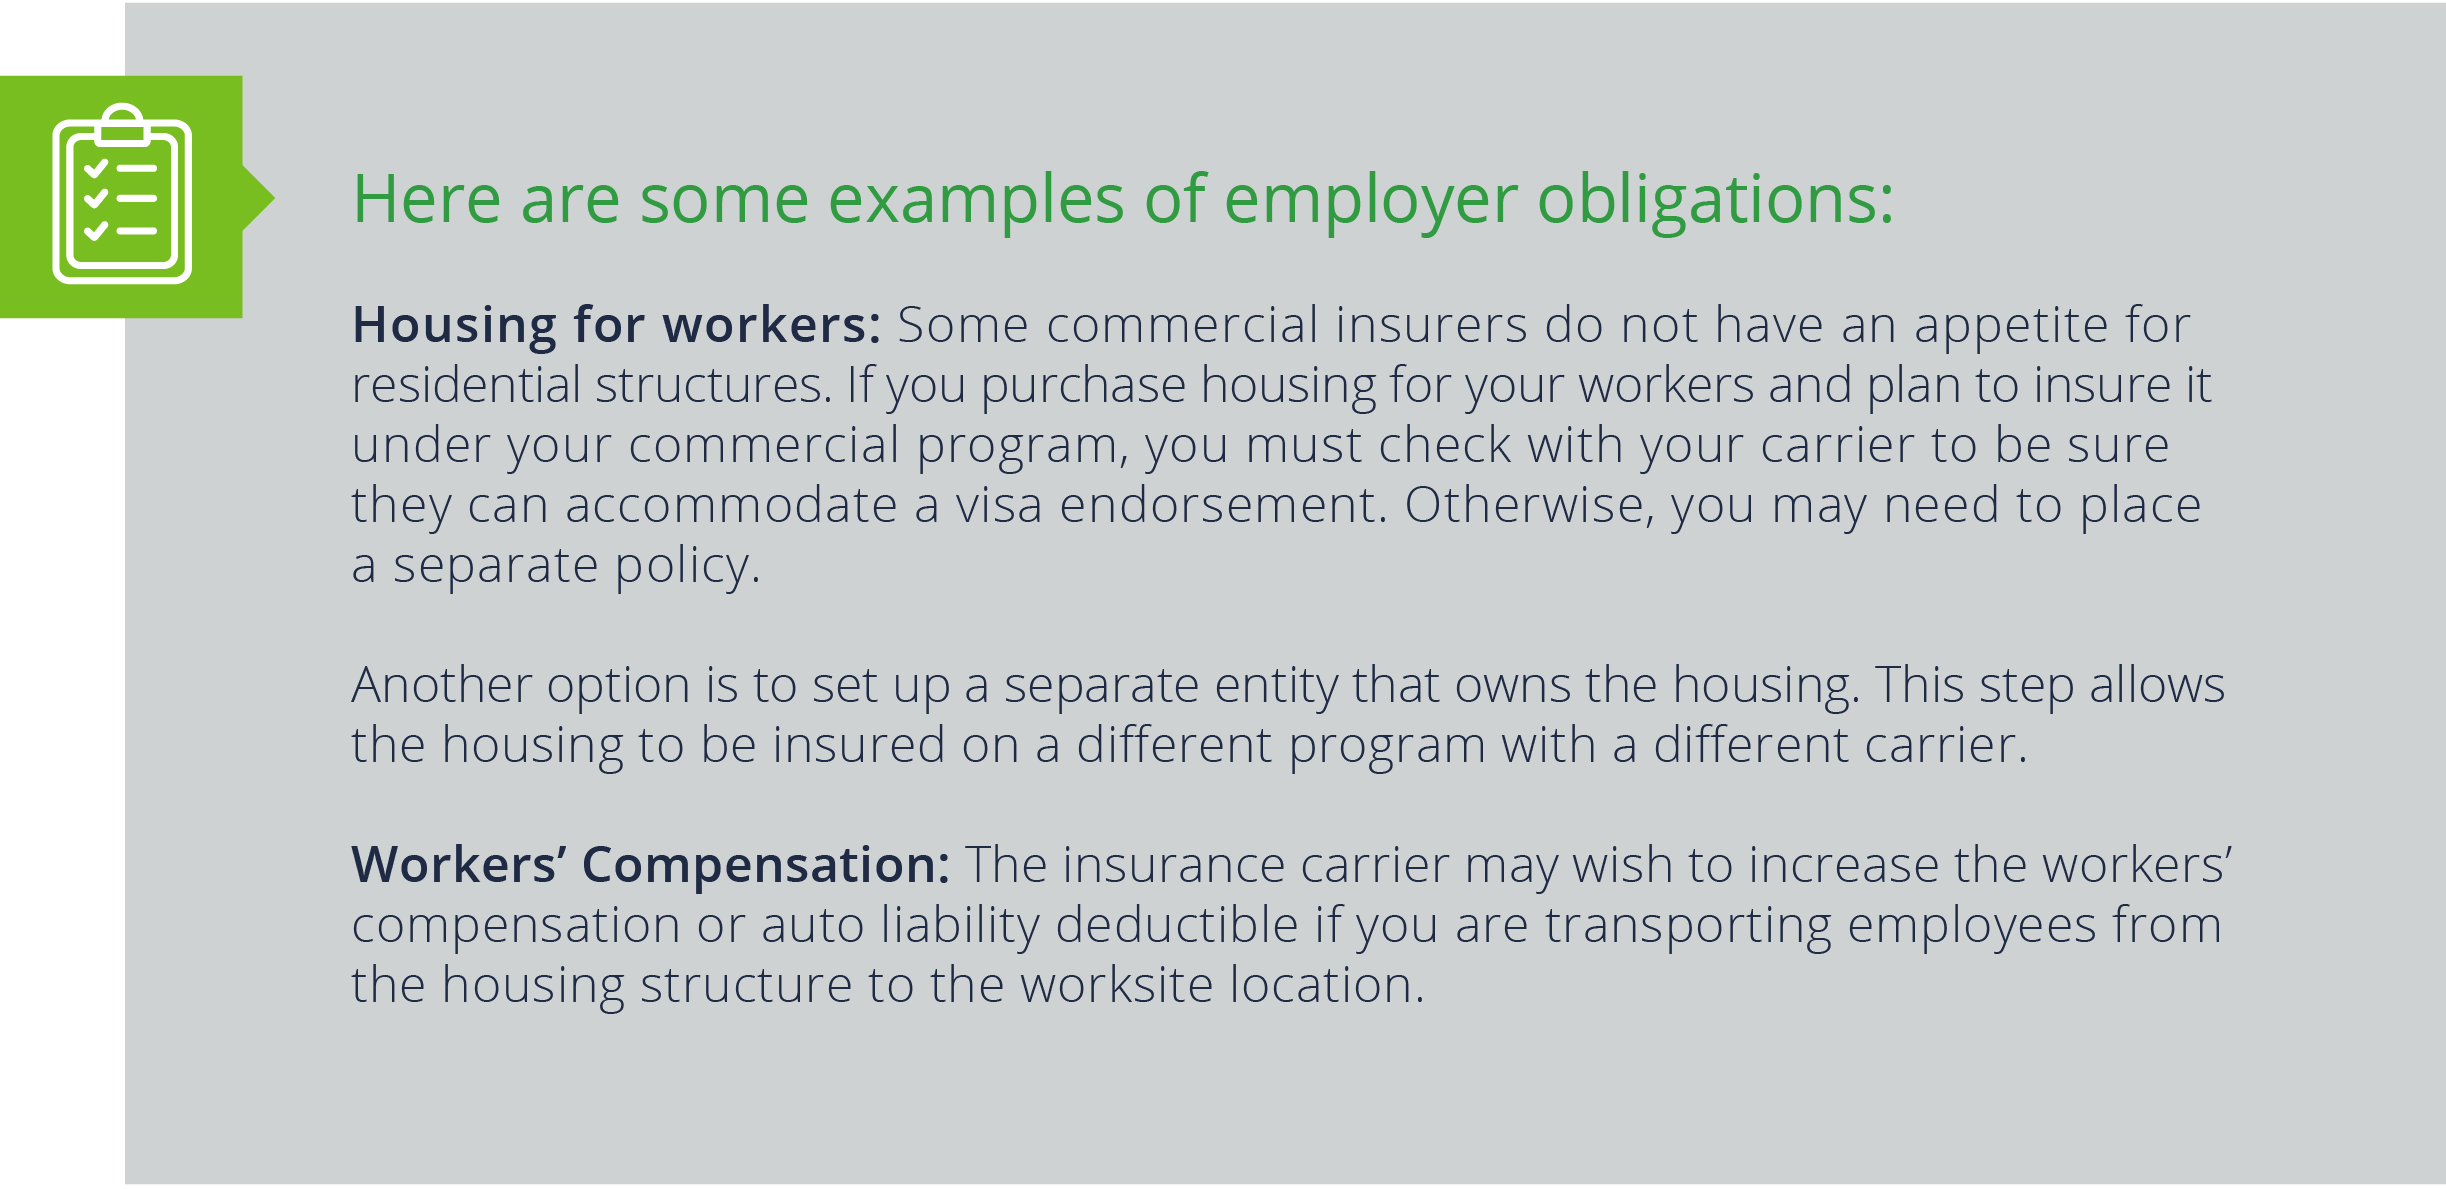 Examples of employer obligations include housing for workers and workers' compensation